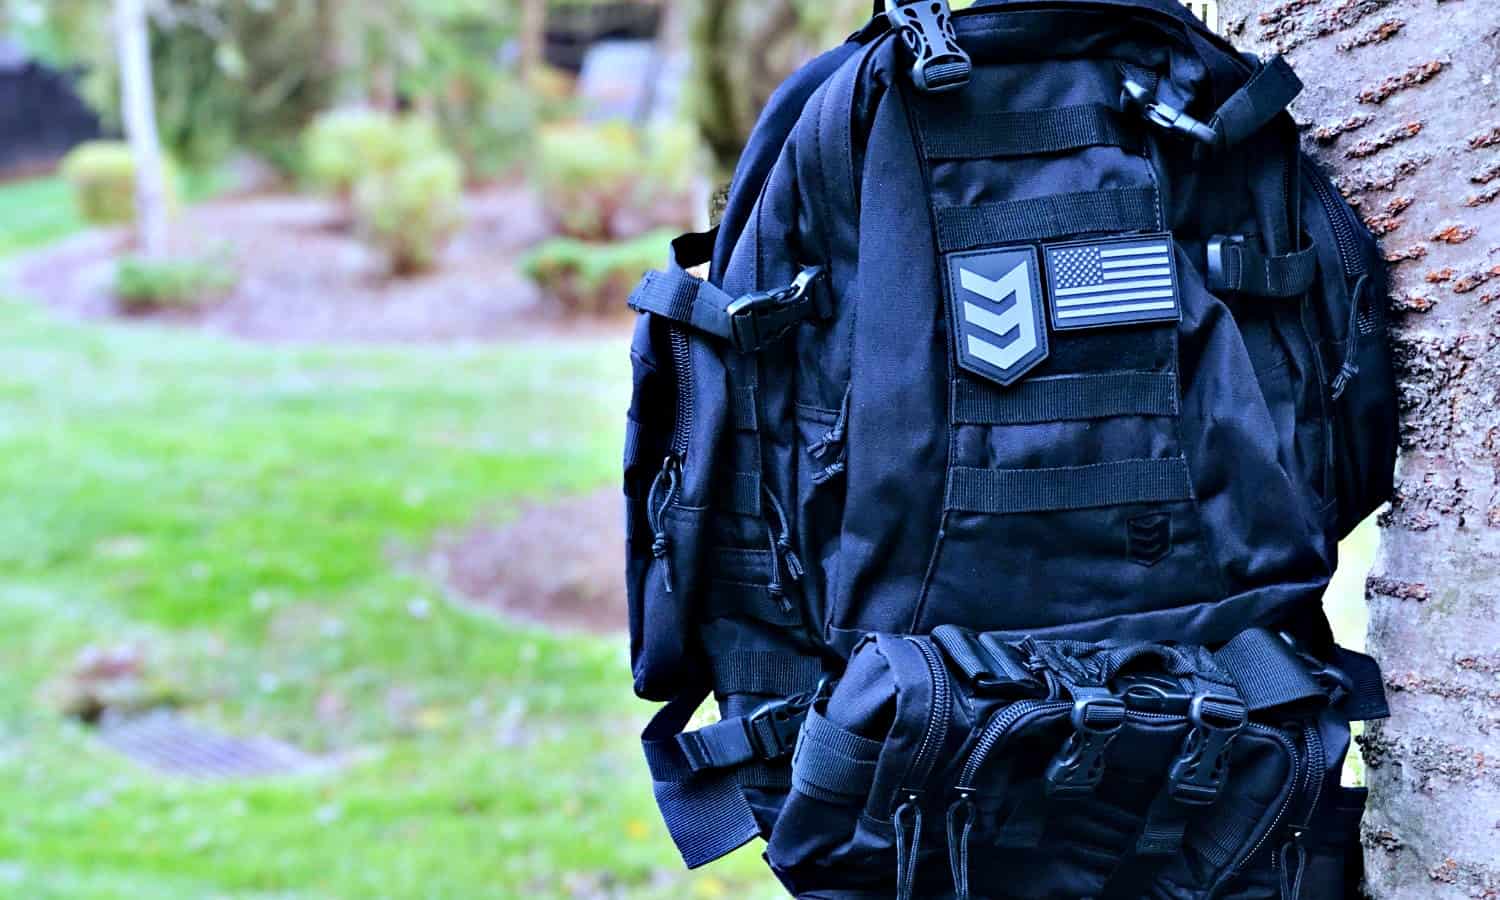 3VGear Paratus 3-Day Operator's Backpack Review